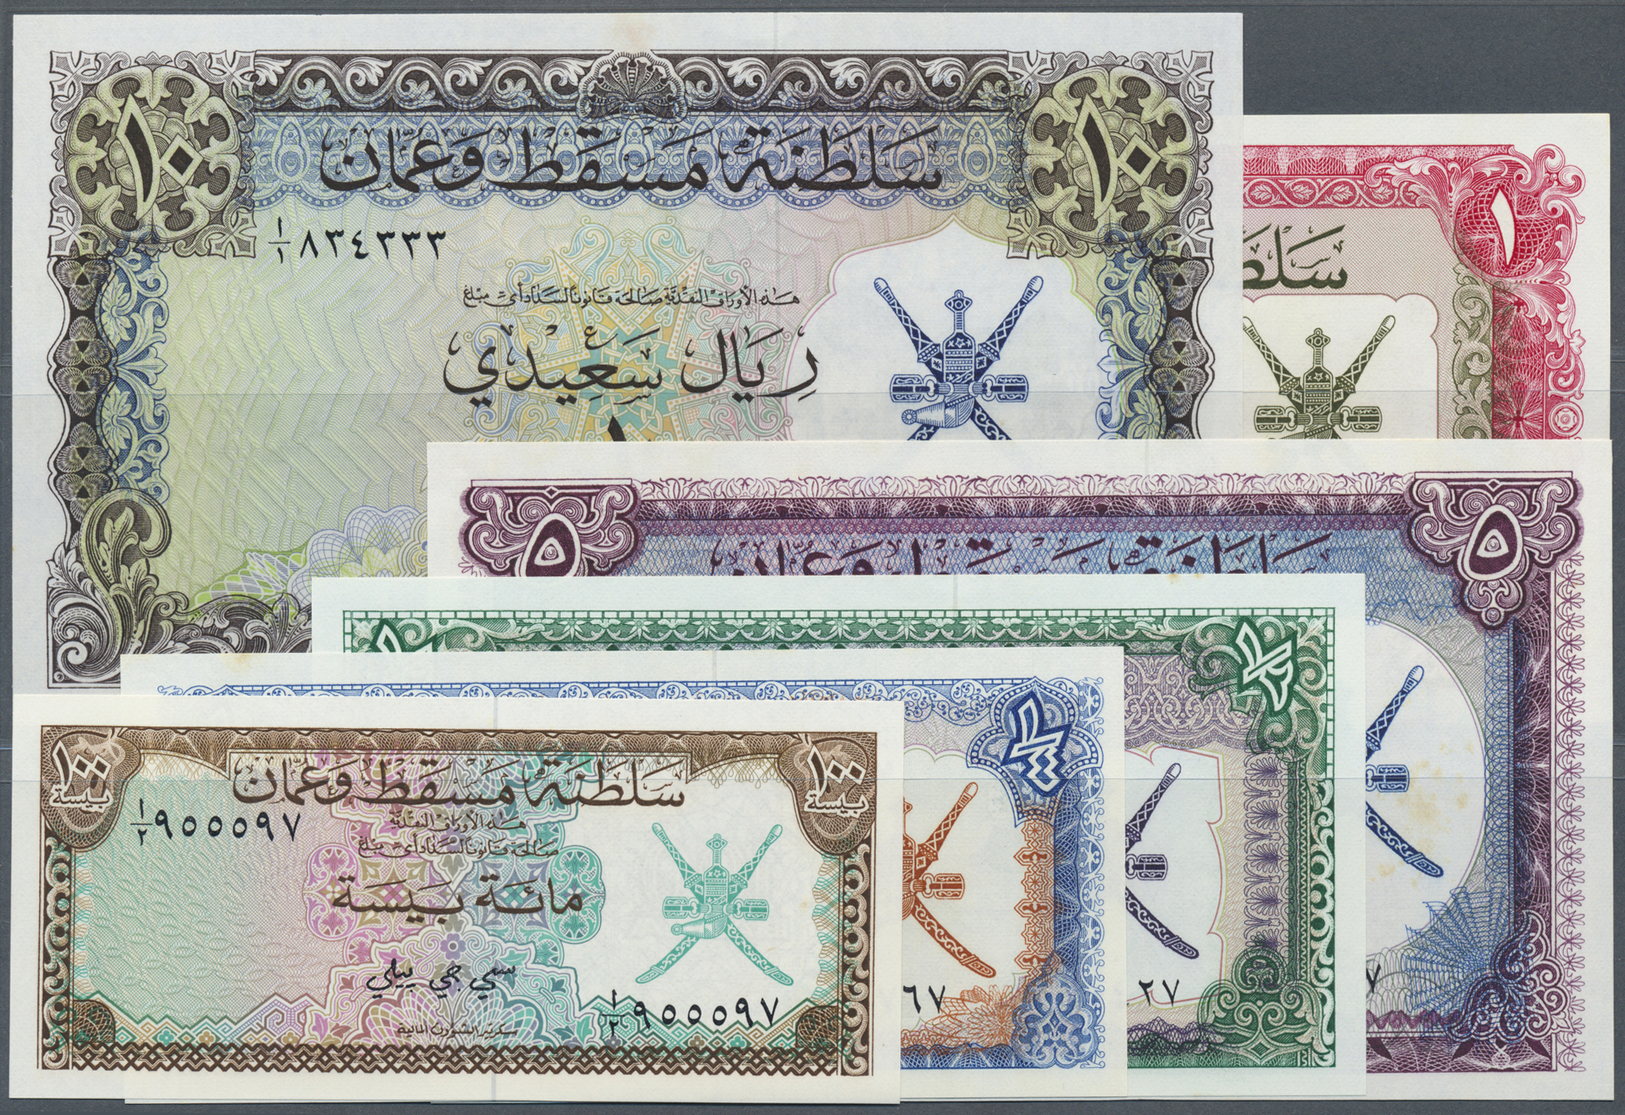 01923 Oman: Muscat & Oman Complete Set From 100 Baisa To 10 Rials ND P. 1-6, The 1/4, 5, 10 And 1 Rials In AUNC, The 5 A - Oman